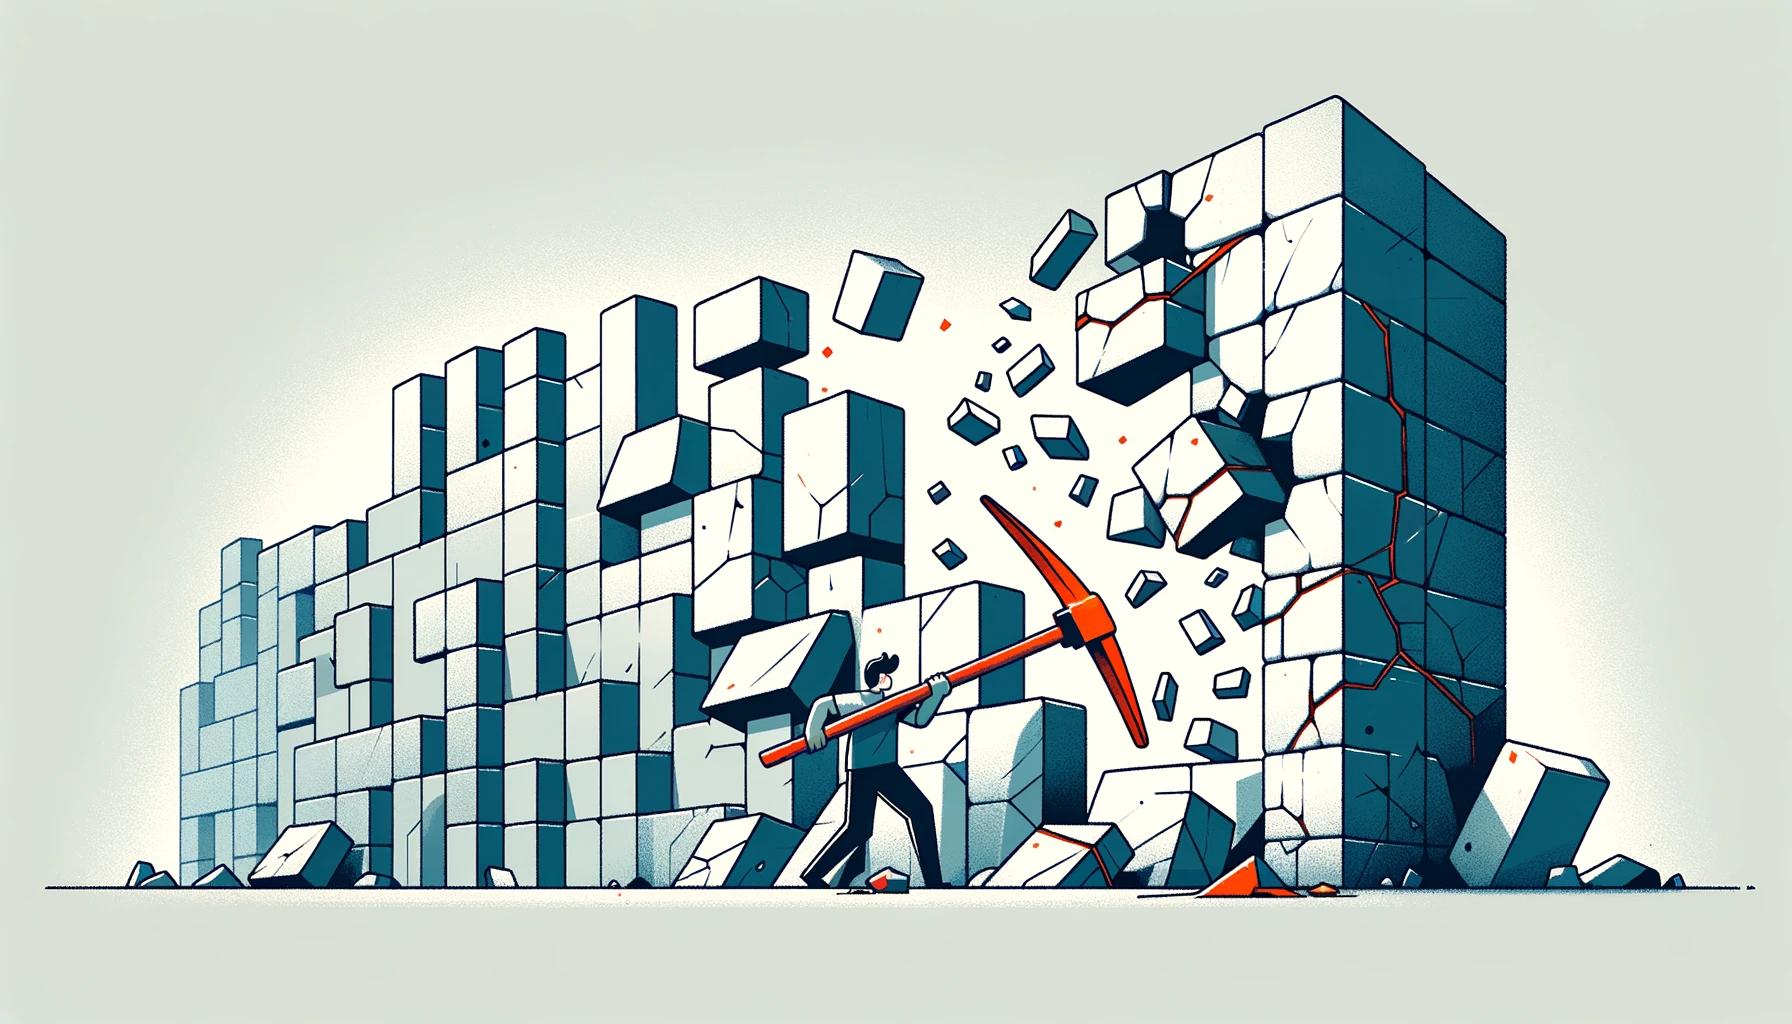 risk register challenges, breaking through wall